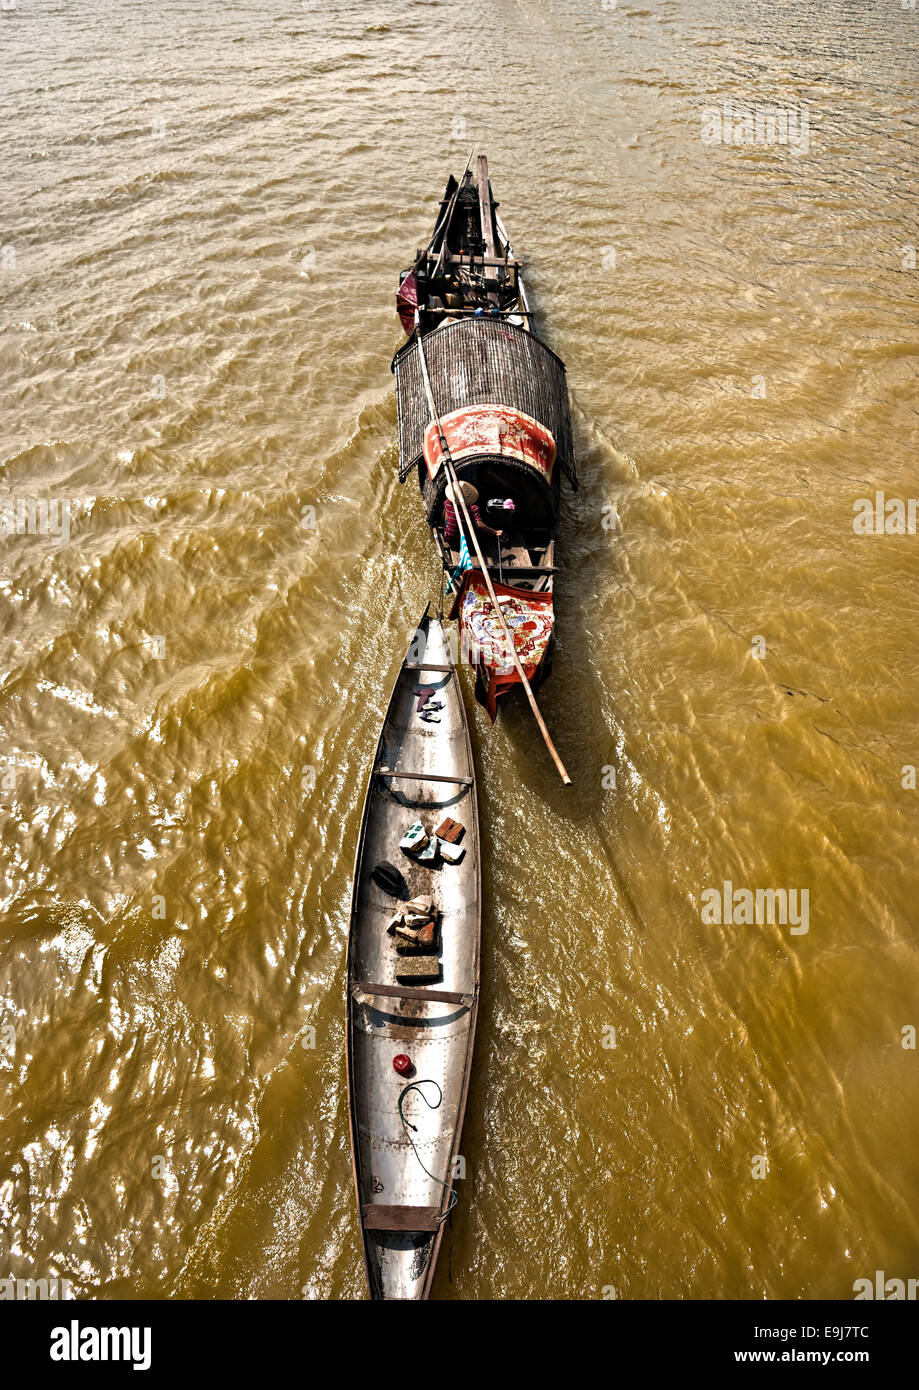 Two Boats in the mekong river, vietnam. Stock Photo